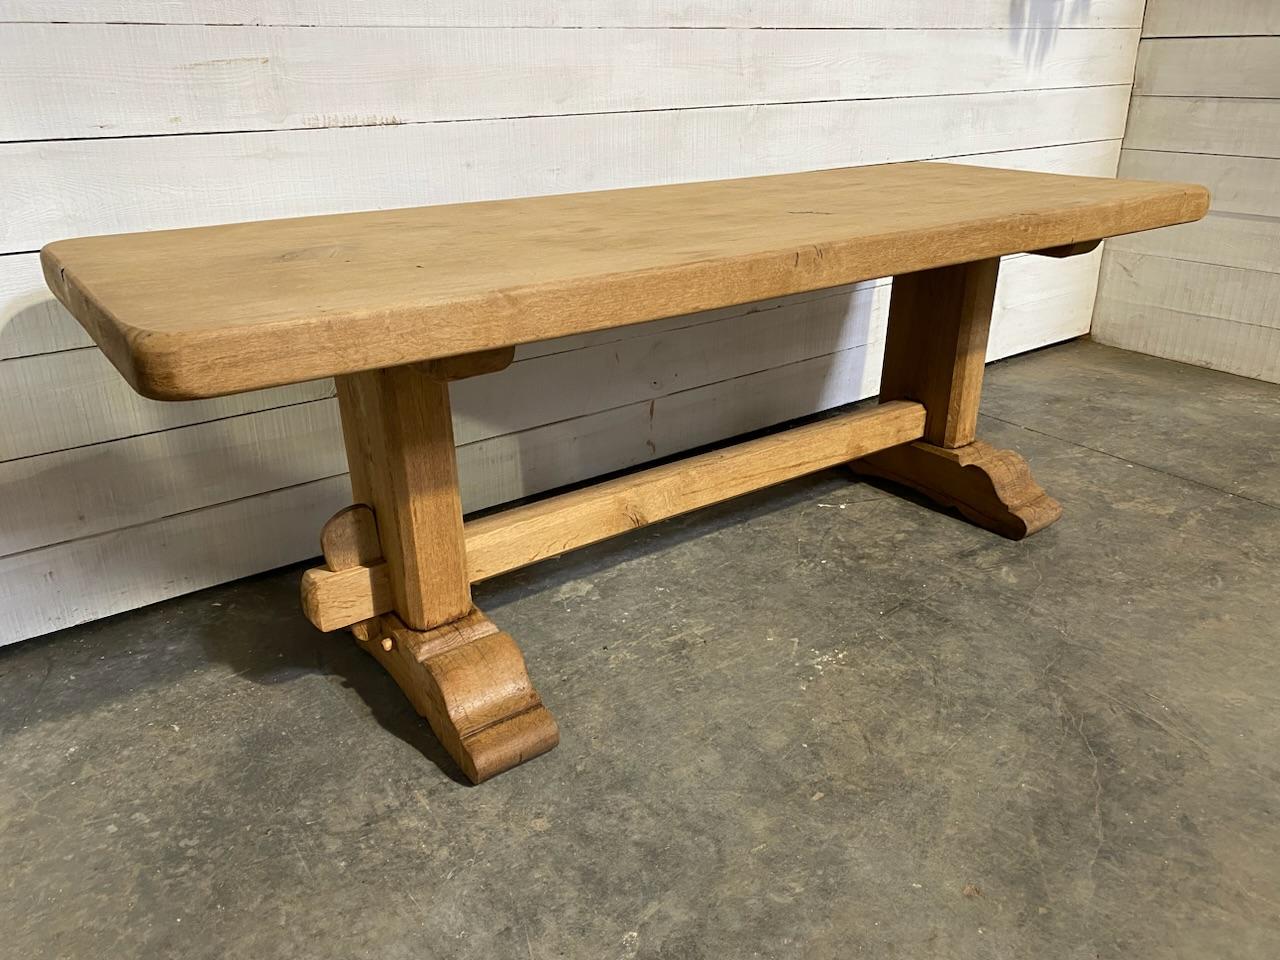 A more Rustic Looking French Farmhouse dining table dating to the early 1900s and made of solid Oak. The top is thick and very heavy. We have bleached it to bring out the natural beauty of the wood and for a fresh look. The table comes apart for